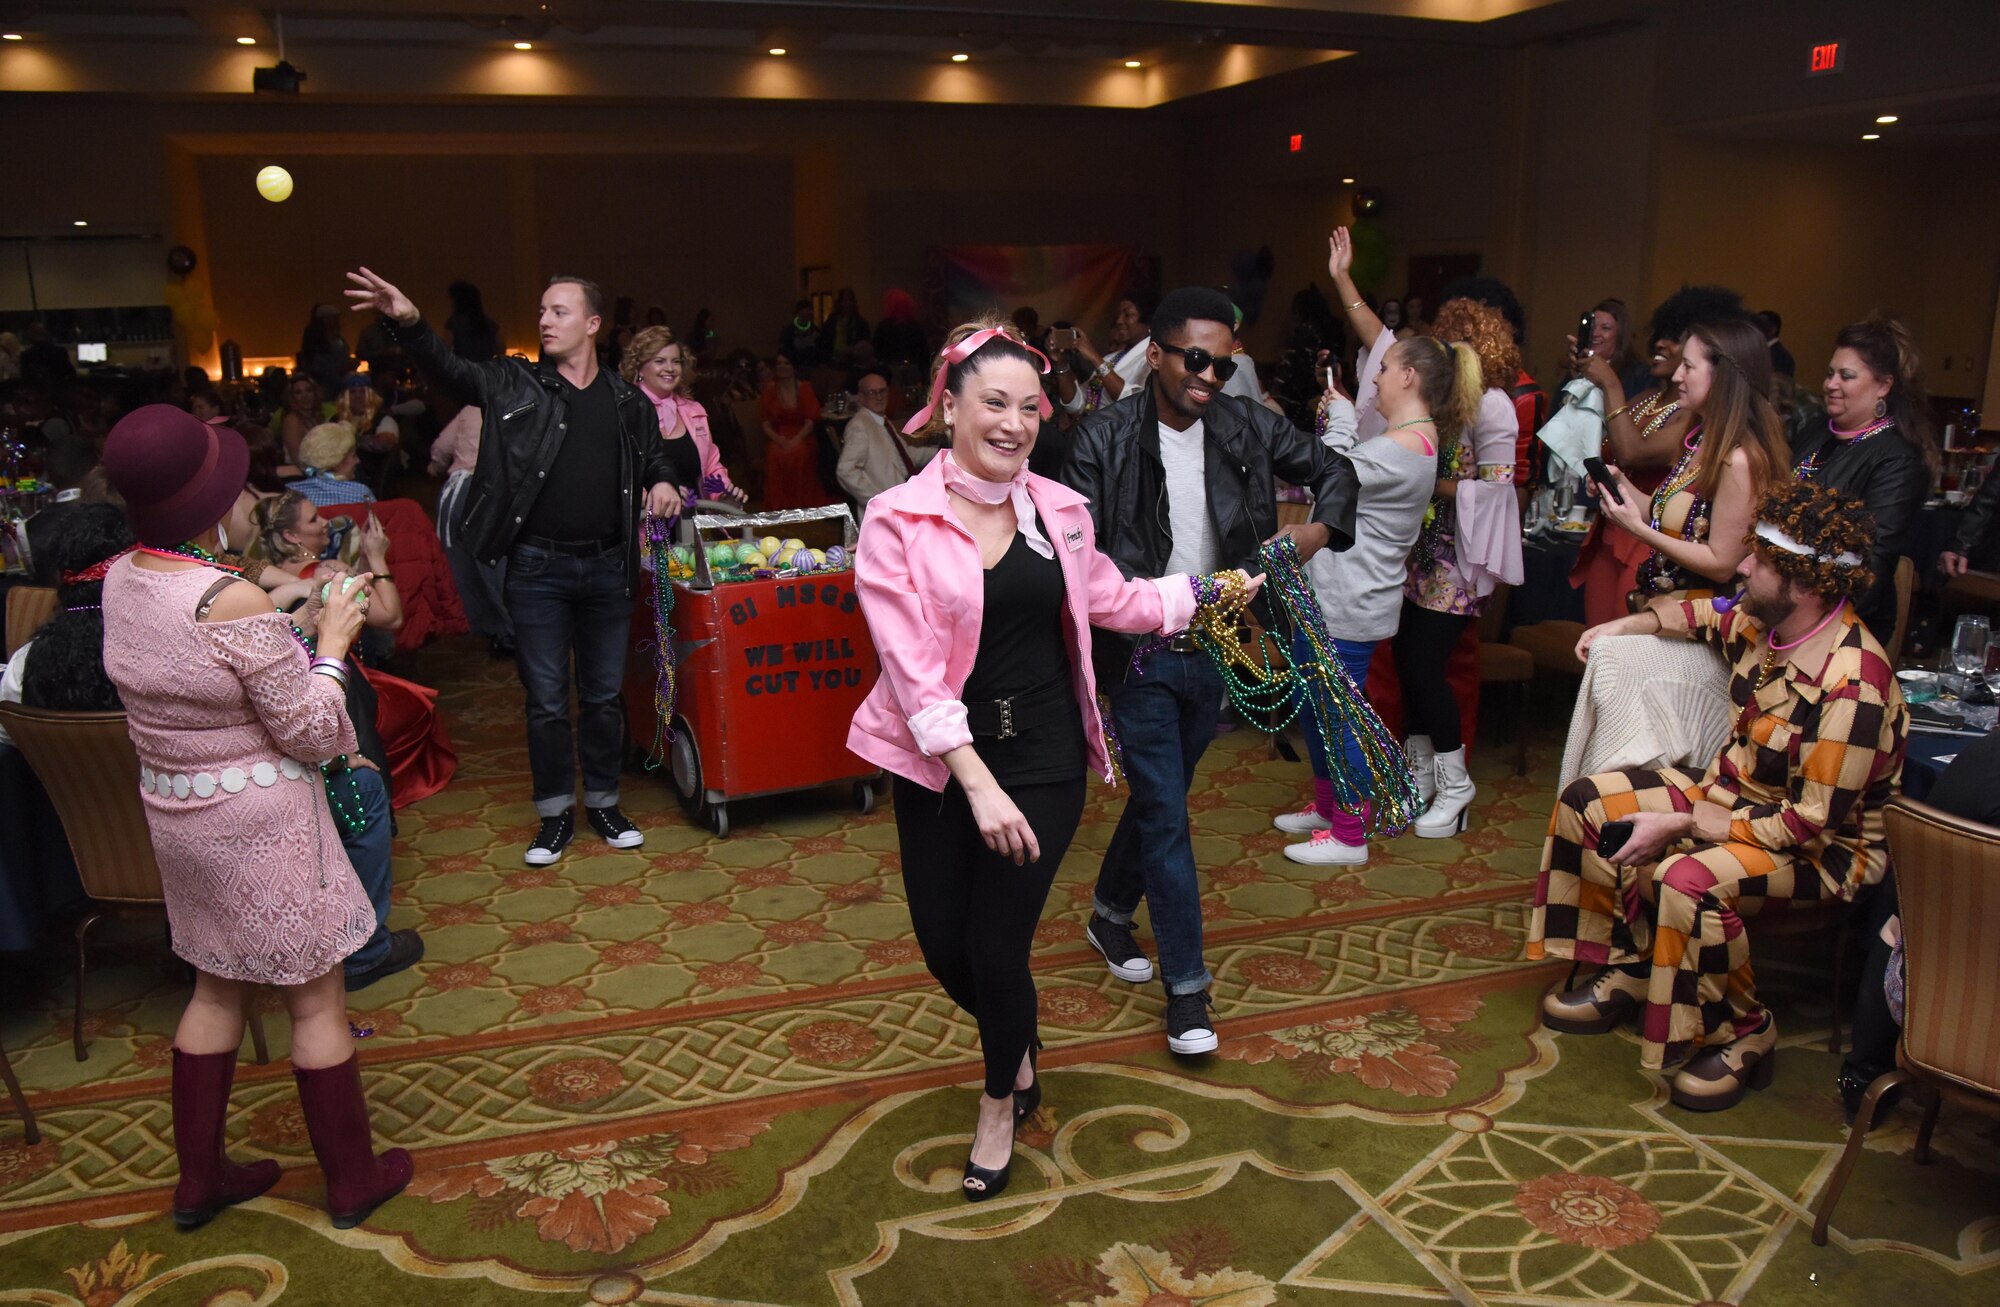 Senior Airman Natalie Malloy, 81st Inpatient Operations Squadron medical technician, and Staff Sgt. Quaci Allen, 81st Surgical Operations Squadron medical technician, dance down the aisle during a Mardi Gras float contest during the 29th Annual Krewe of Medics Mardi Gras Ball at the Bay Breeze Event Center Jan. 28, 2017, on Keesler Air Force Base, Miss. The Krewe of Medics hosts a yearly ball to give Keesler Medical Center personnel a taste of the Gulf Coast and an opportunity to experience a traditional Mardi Gras. The theme for this year's ball was Blast From The Past. (U.S. Air Force photo by Kemberly Groue)